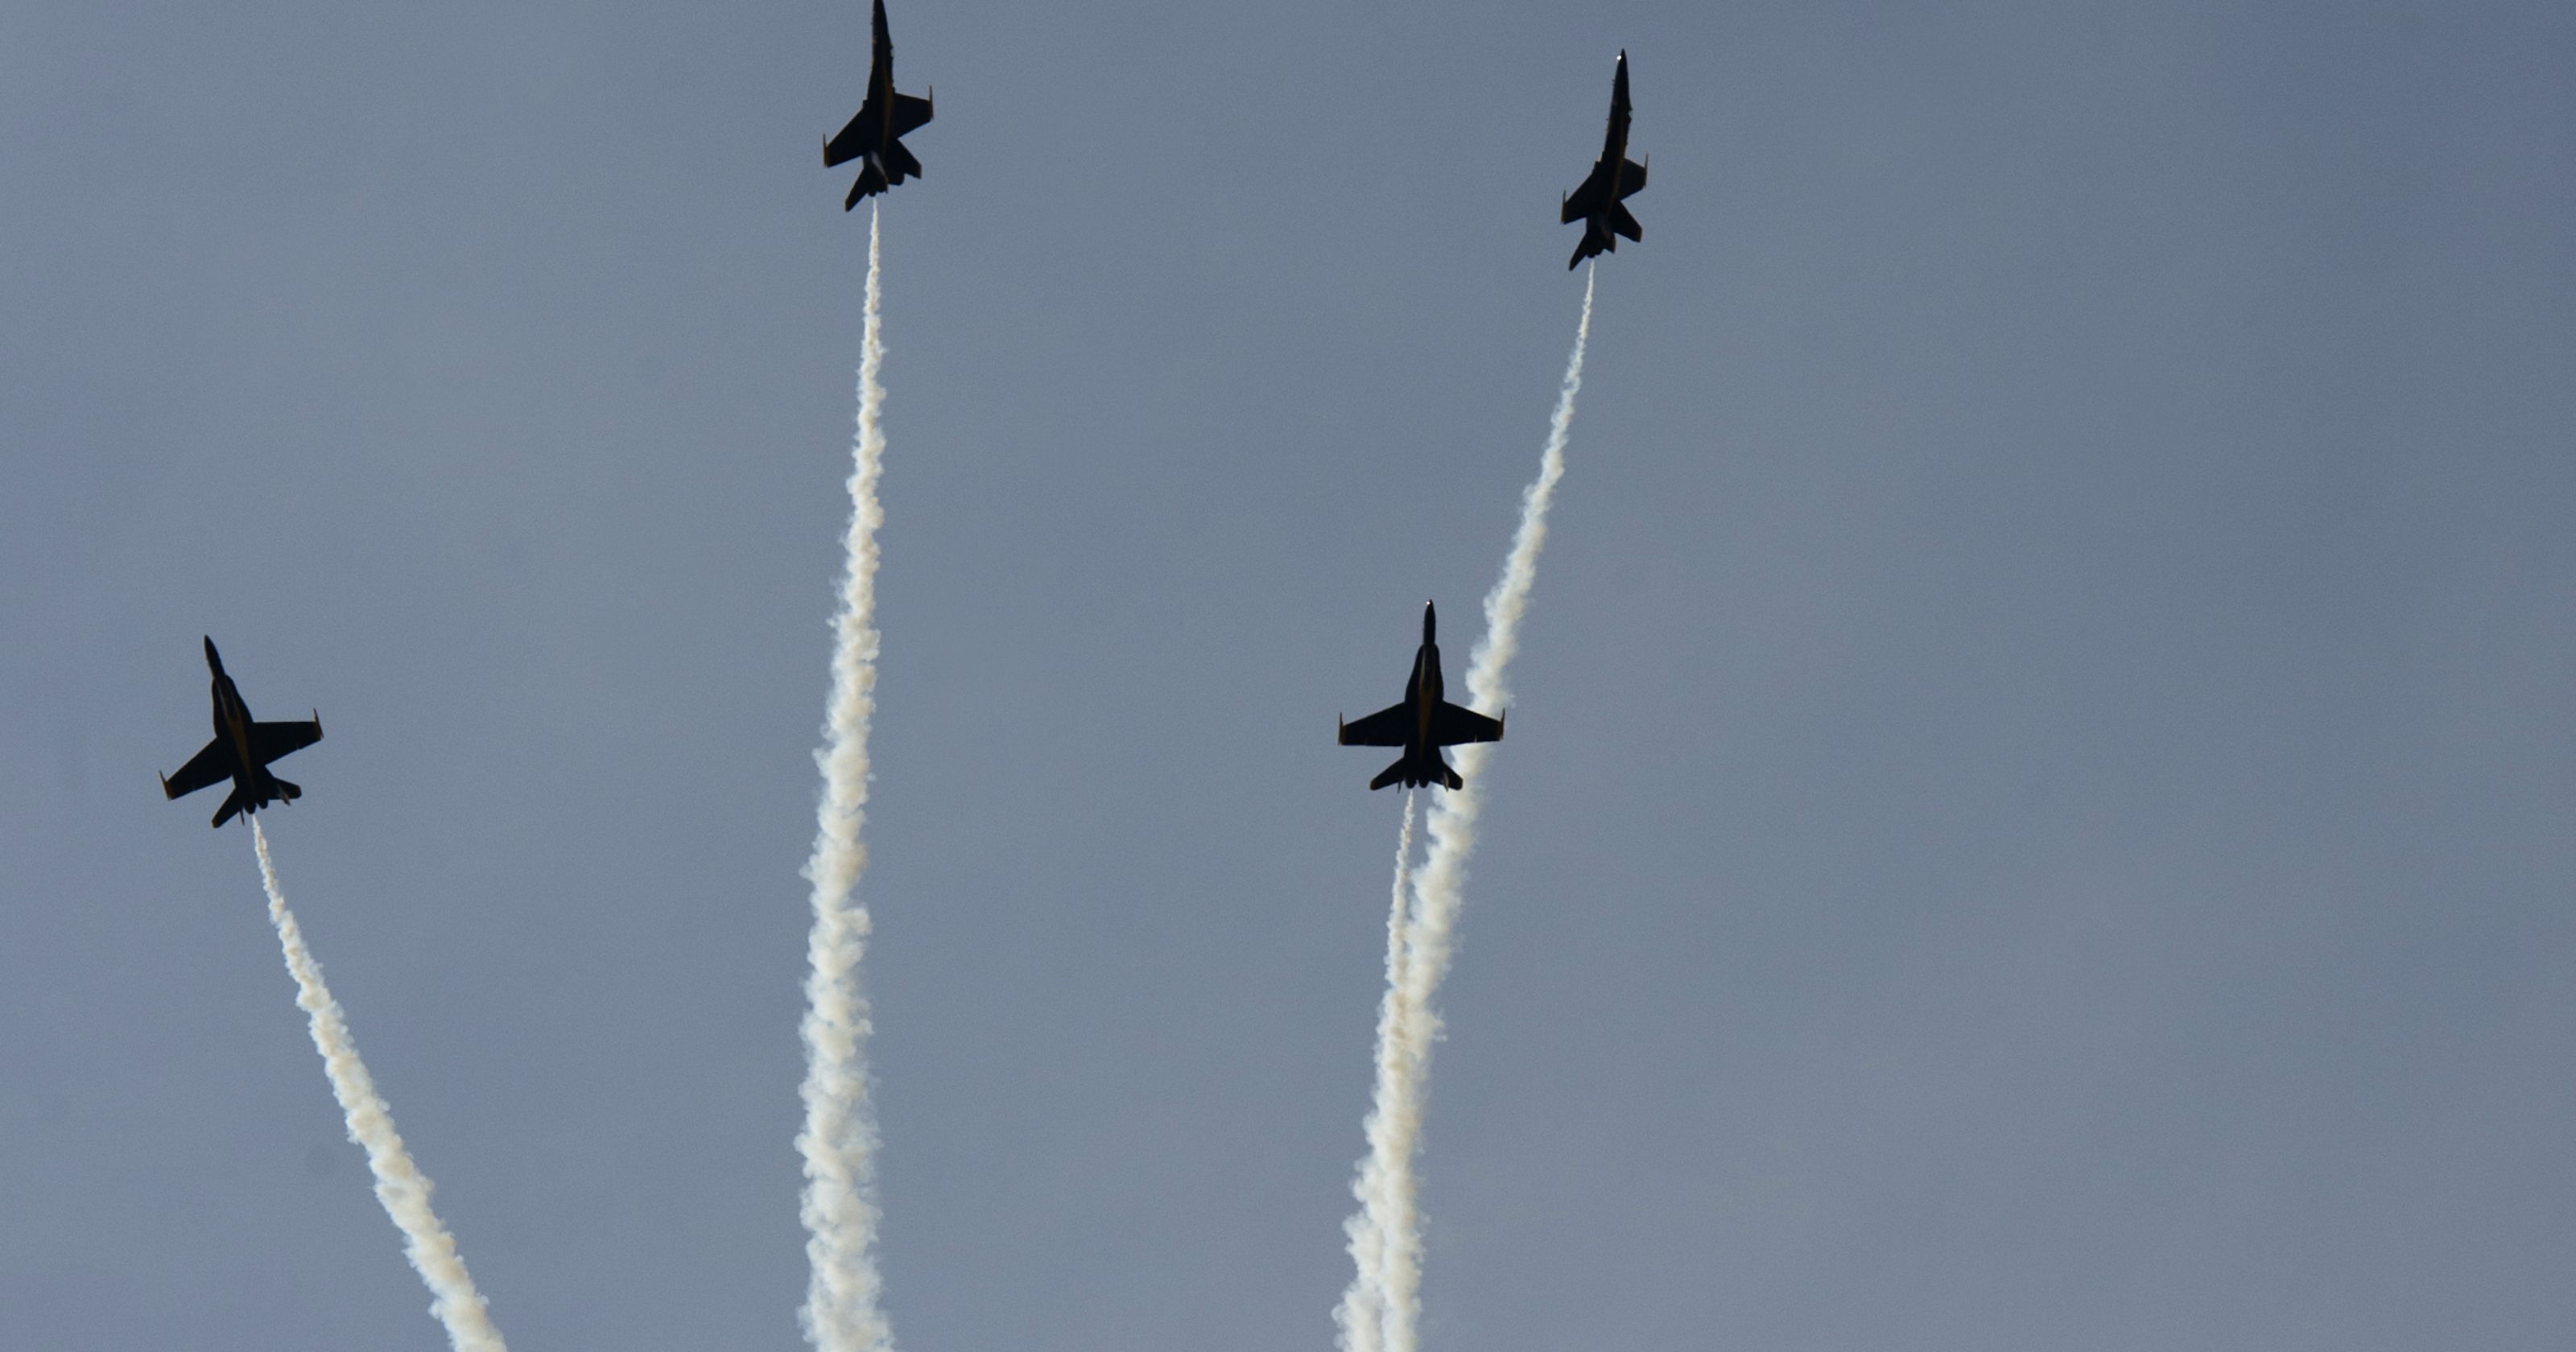 Chance of rain, cloudy conditions expected for Vero Beach Air Show